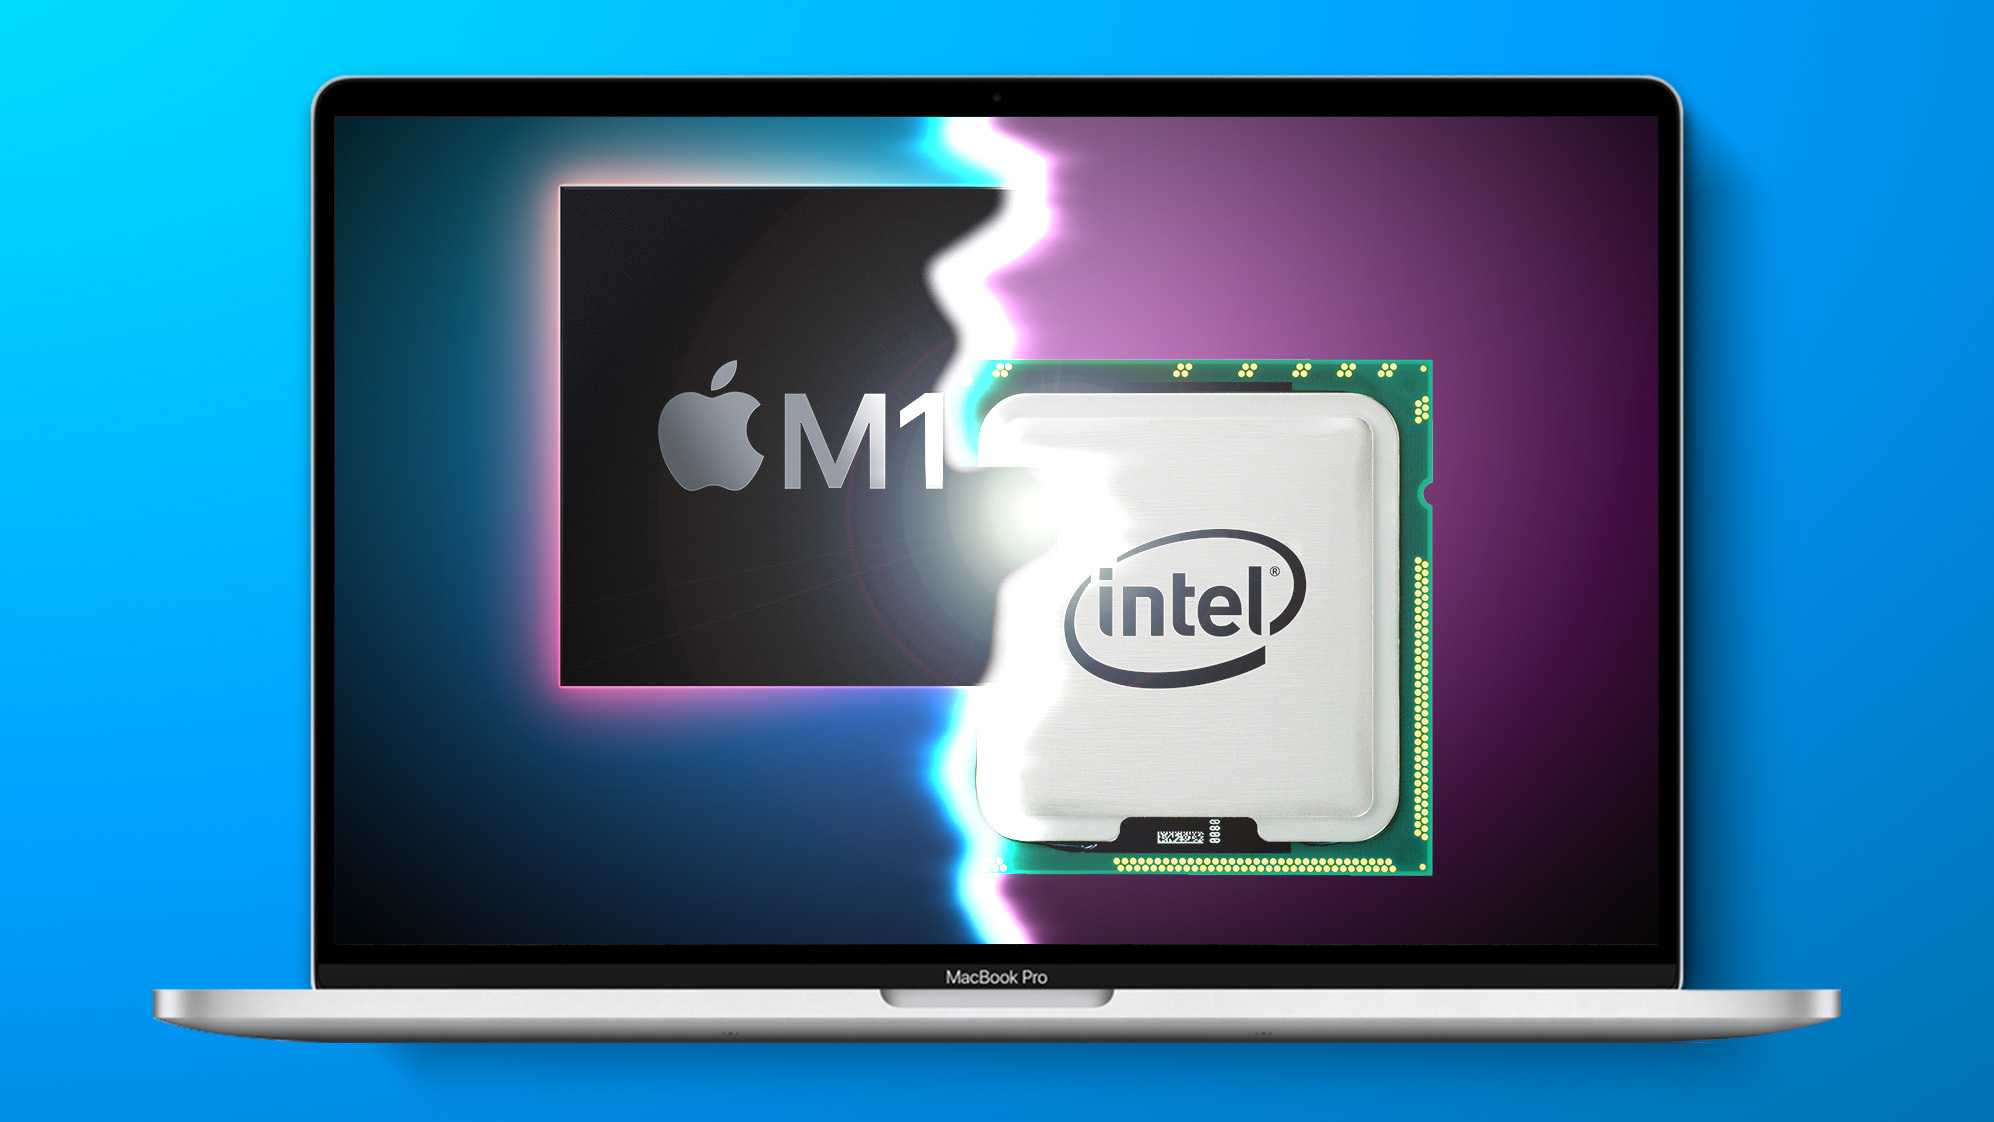 download the last version for apple Intel Graphics Driver 31.0.101.4972